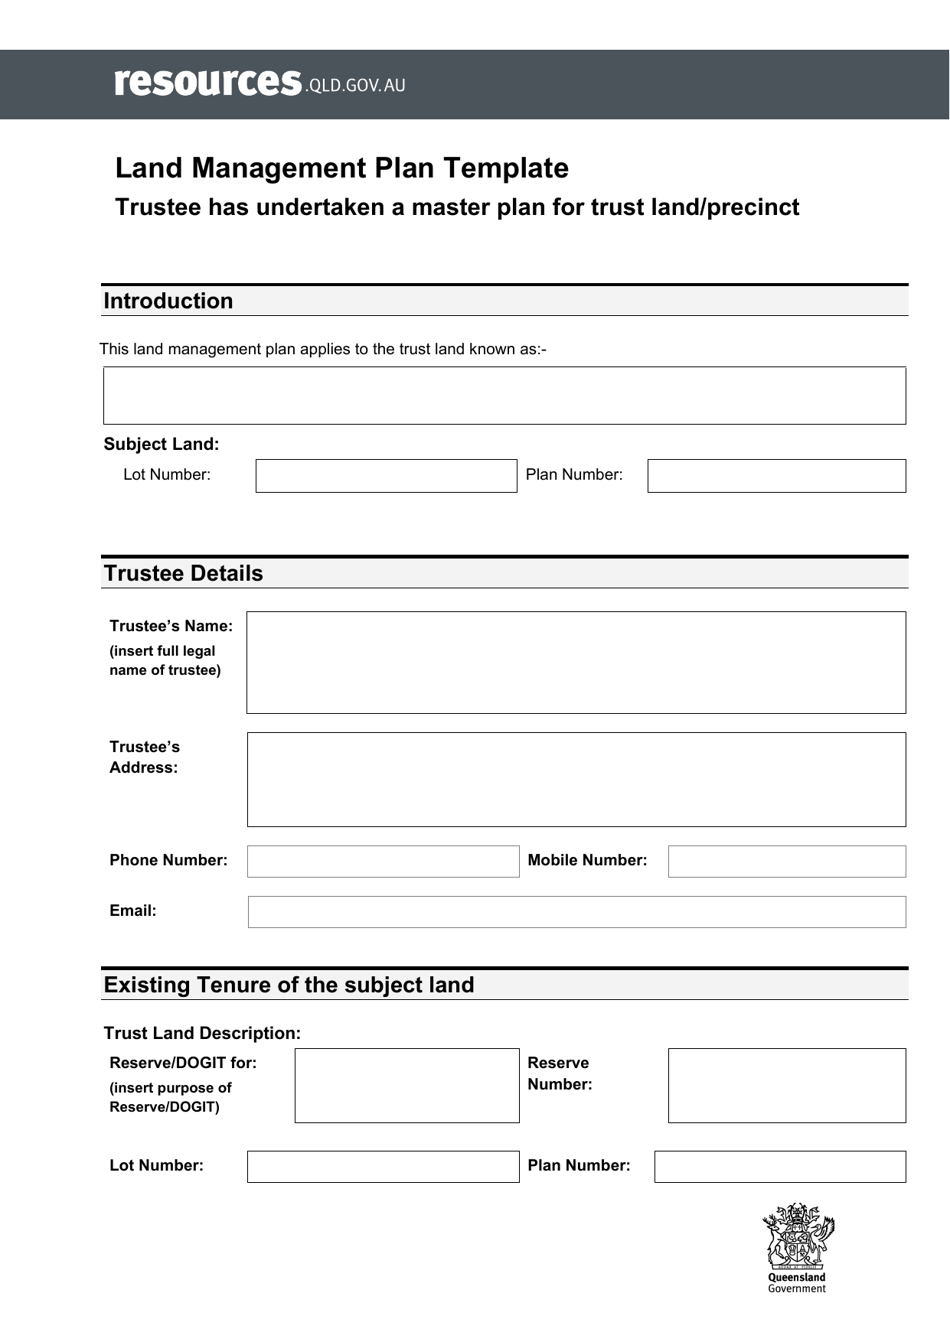 Land Management Plan Template (With Master Plan) - Queensland, Australia, Page 1